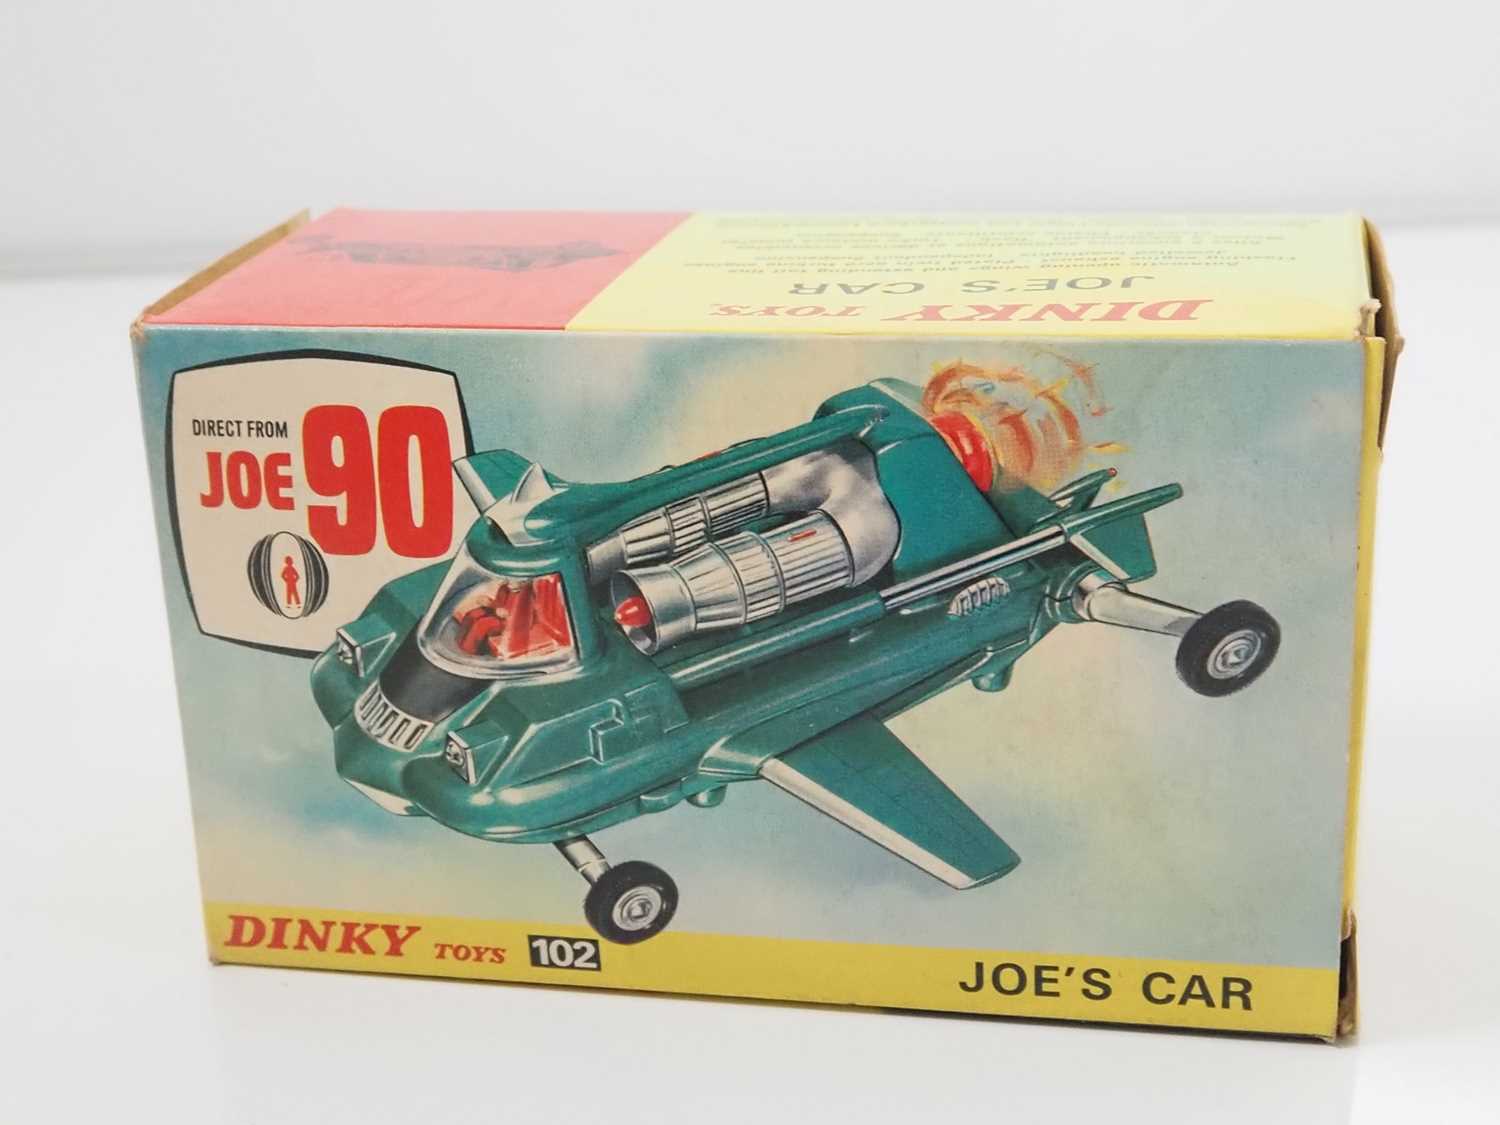 A DINKY 102 diecast 'Gerry Anderson's Joe 90' Joe's Car in metallic blue with blue/white fold out - Image 4 of 6